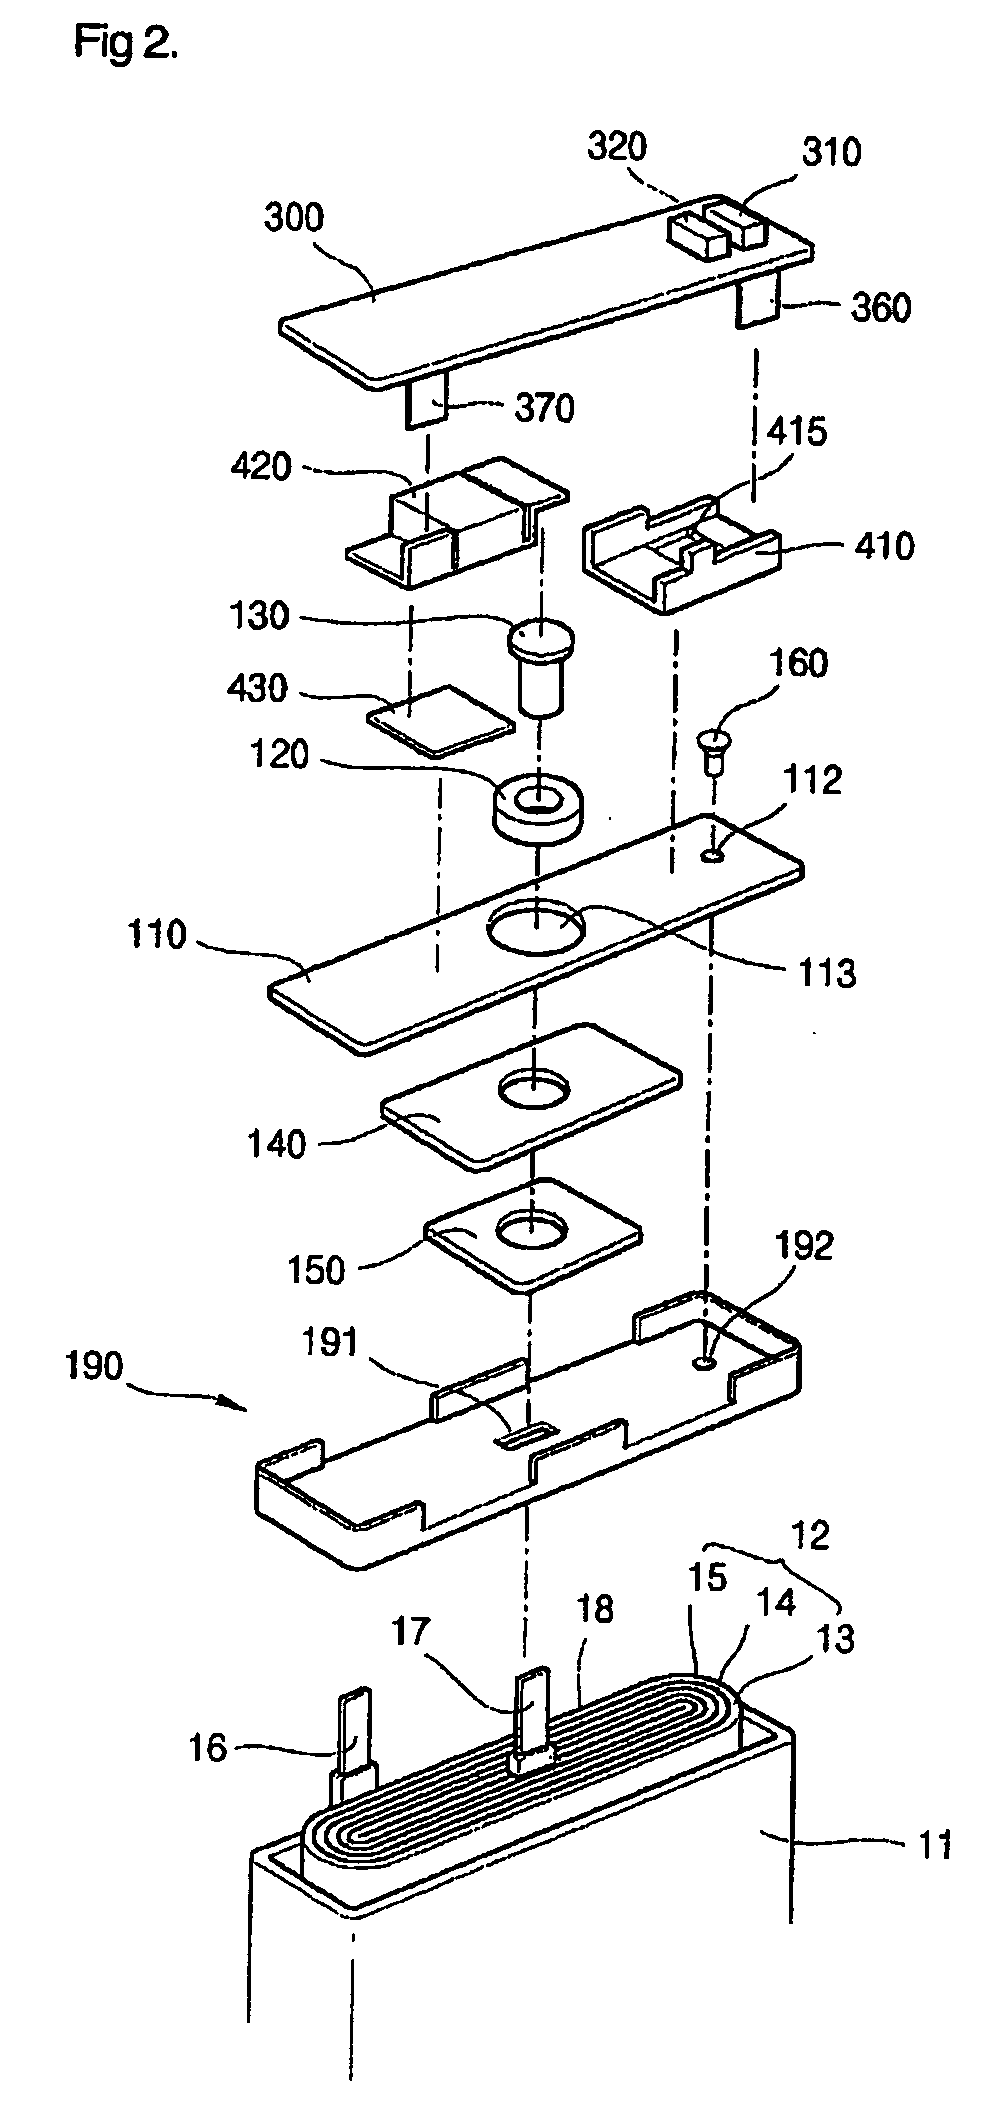 Secondary battery having lead plate attached thereto